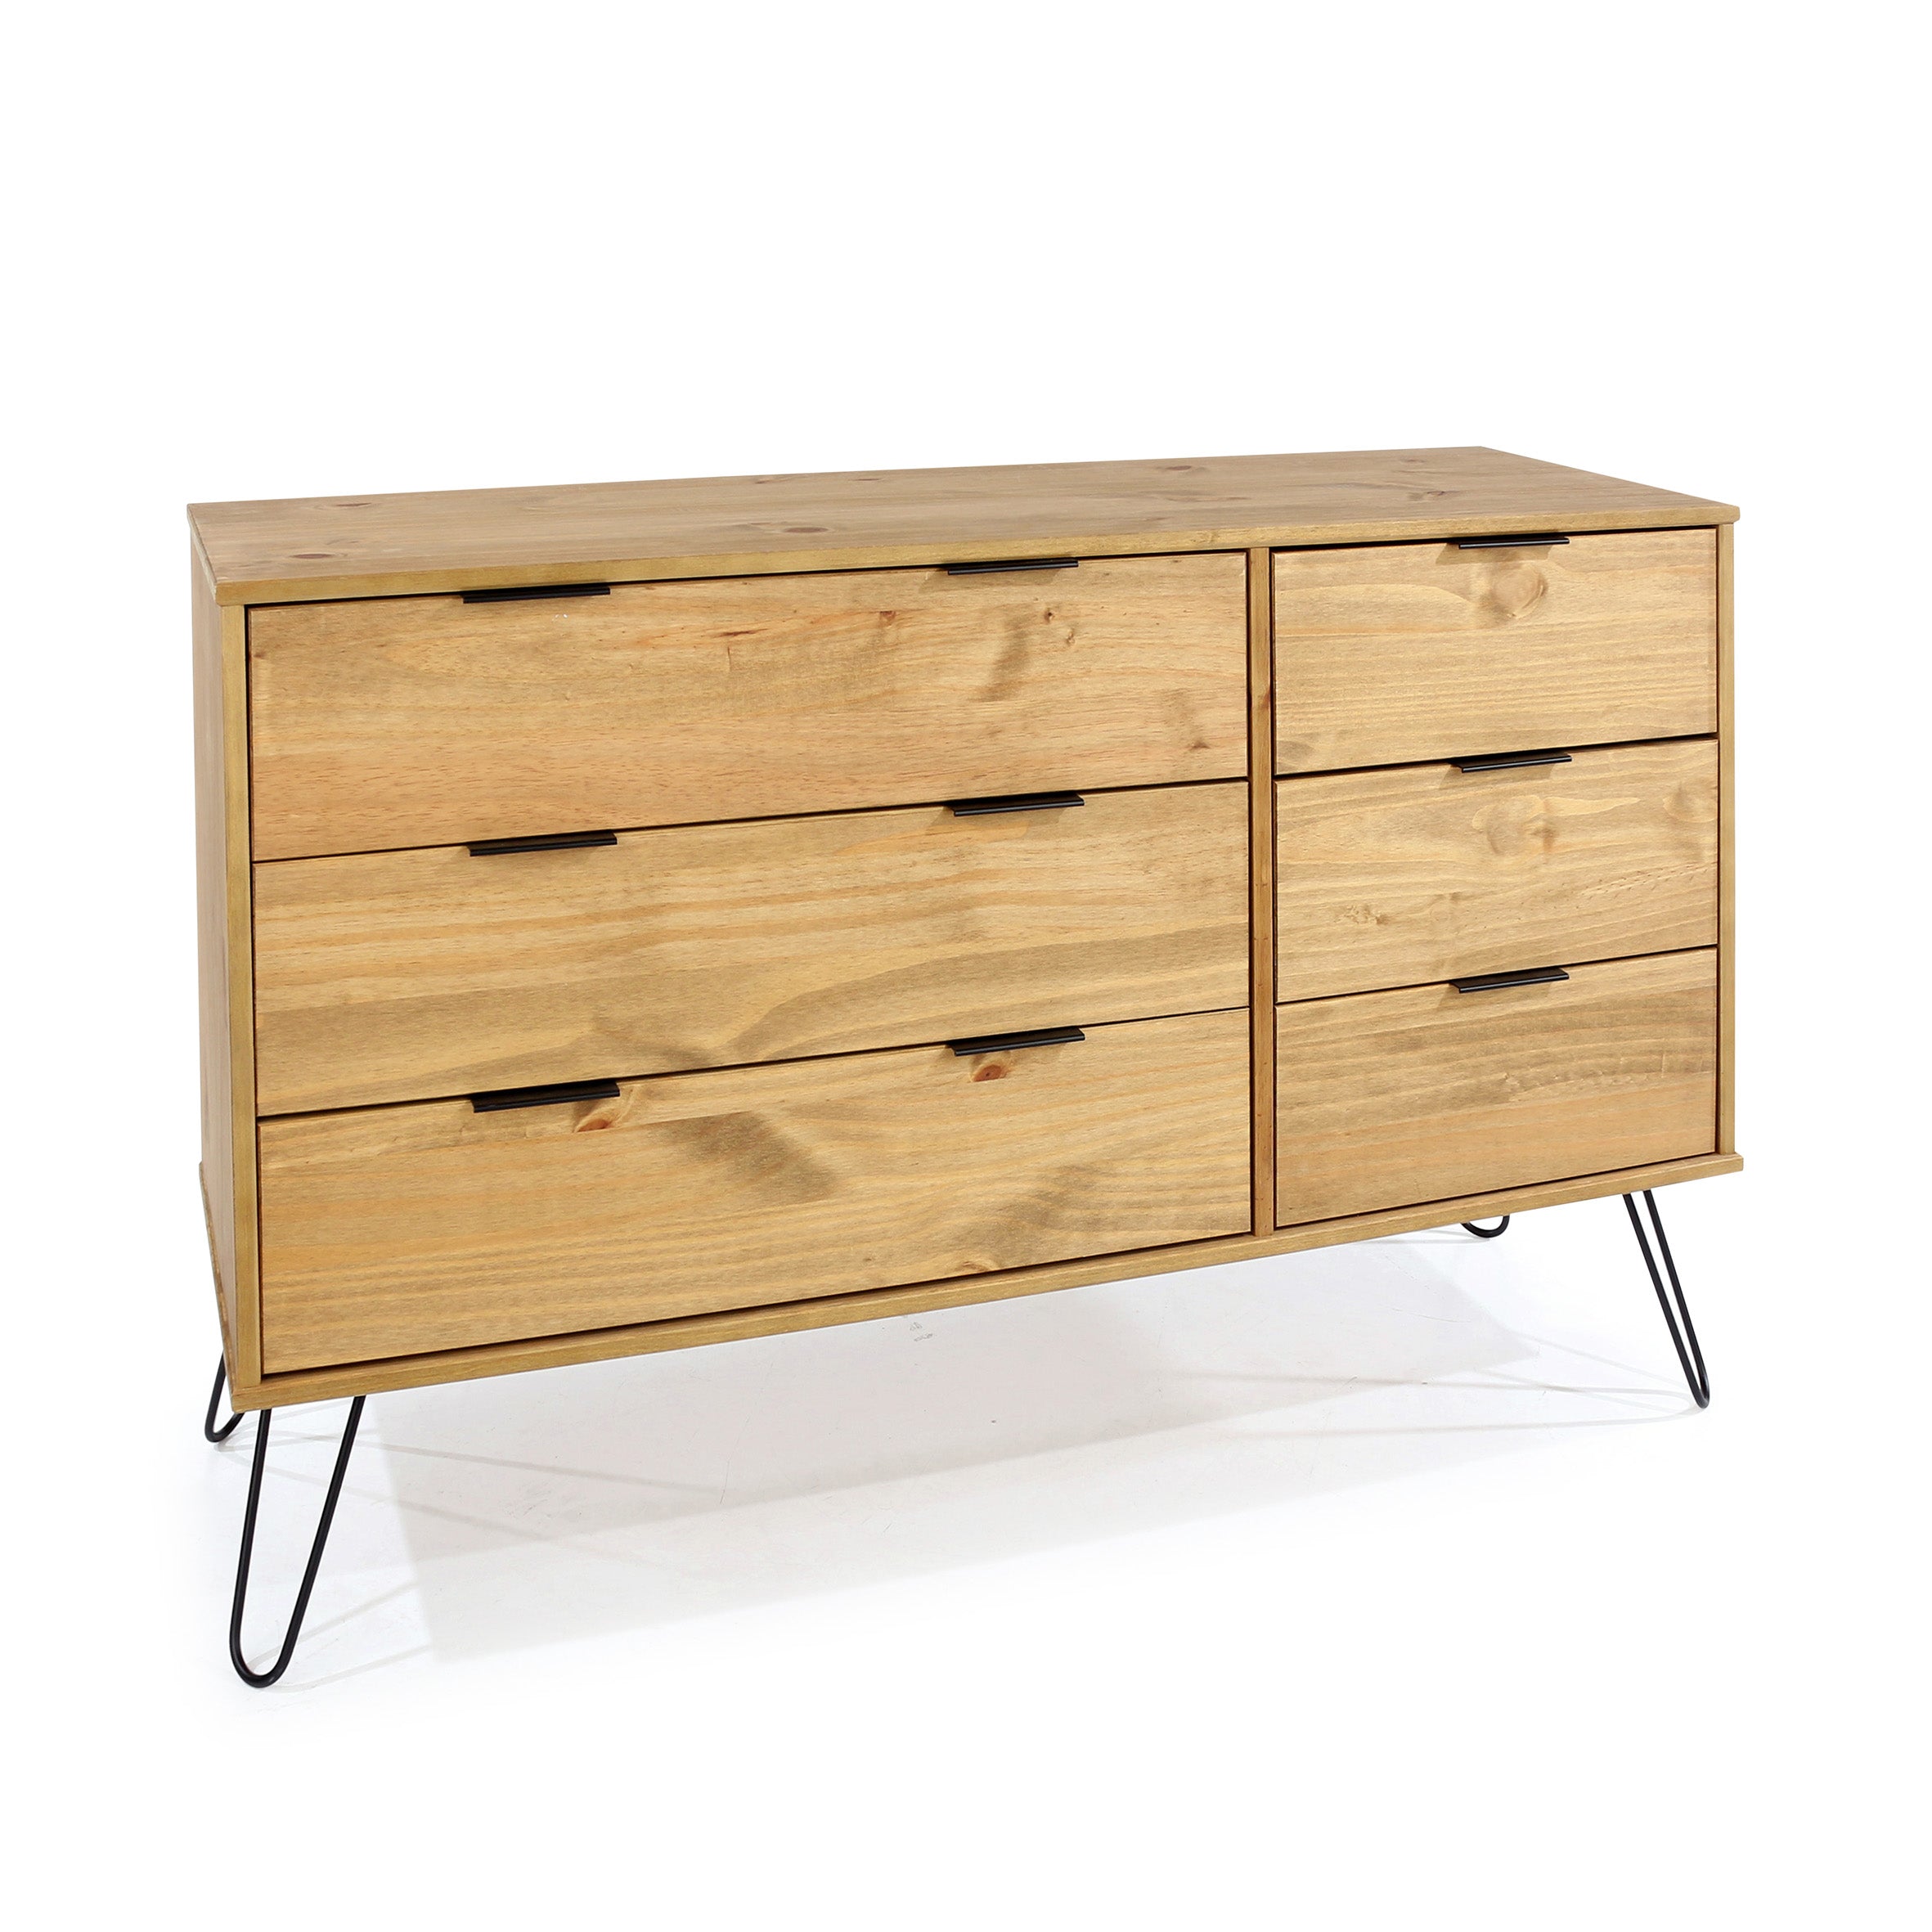 Augusta Pine 3+3 Drawer Wide Chest With Hairpin Legs